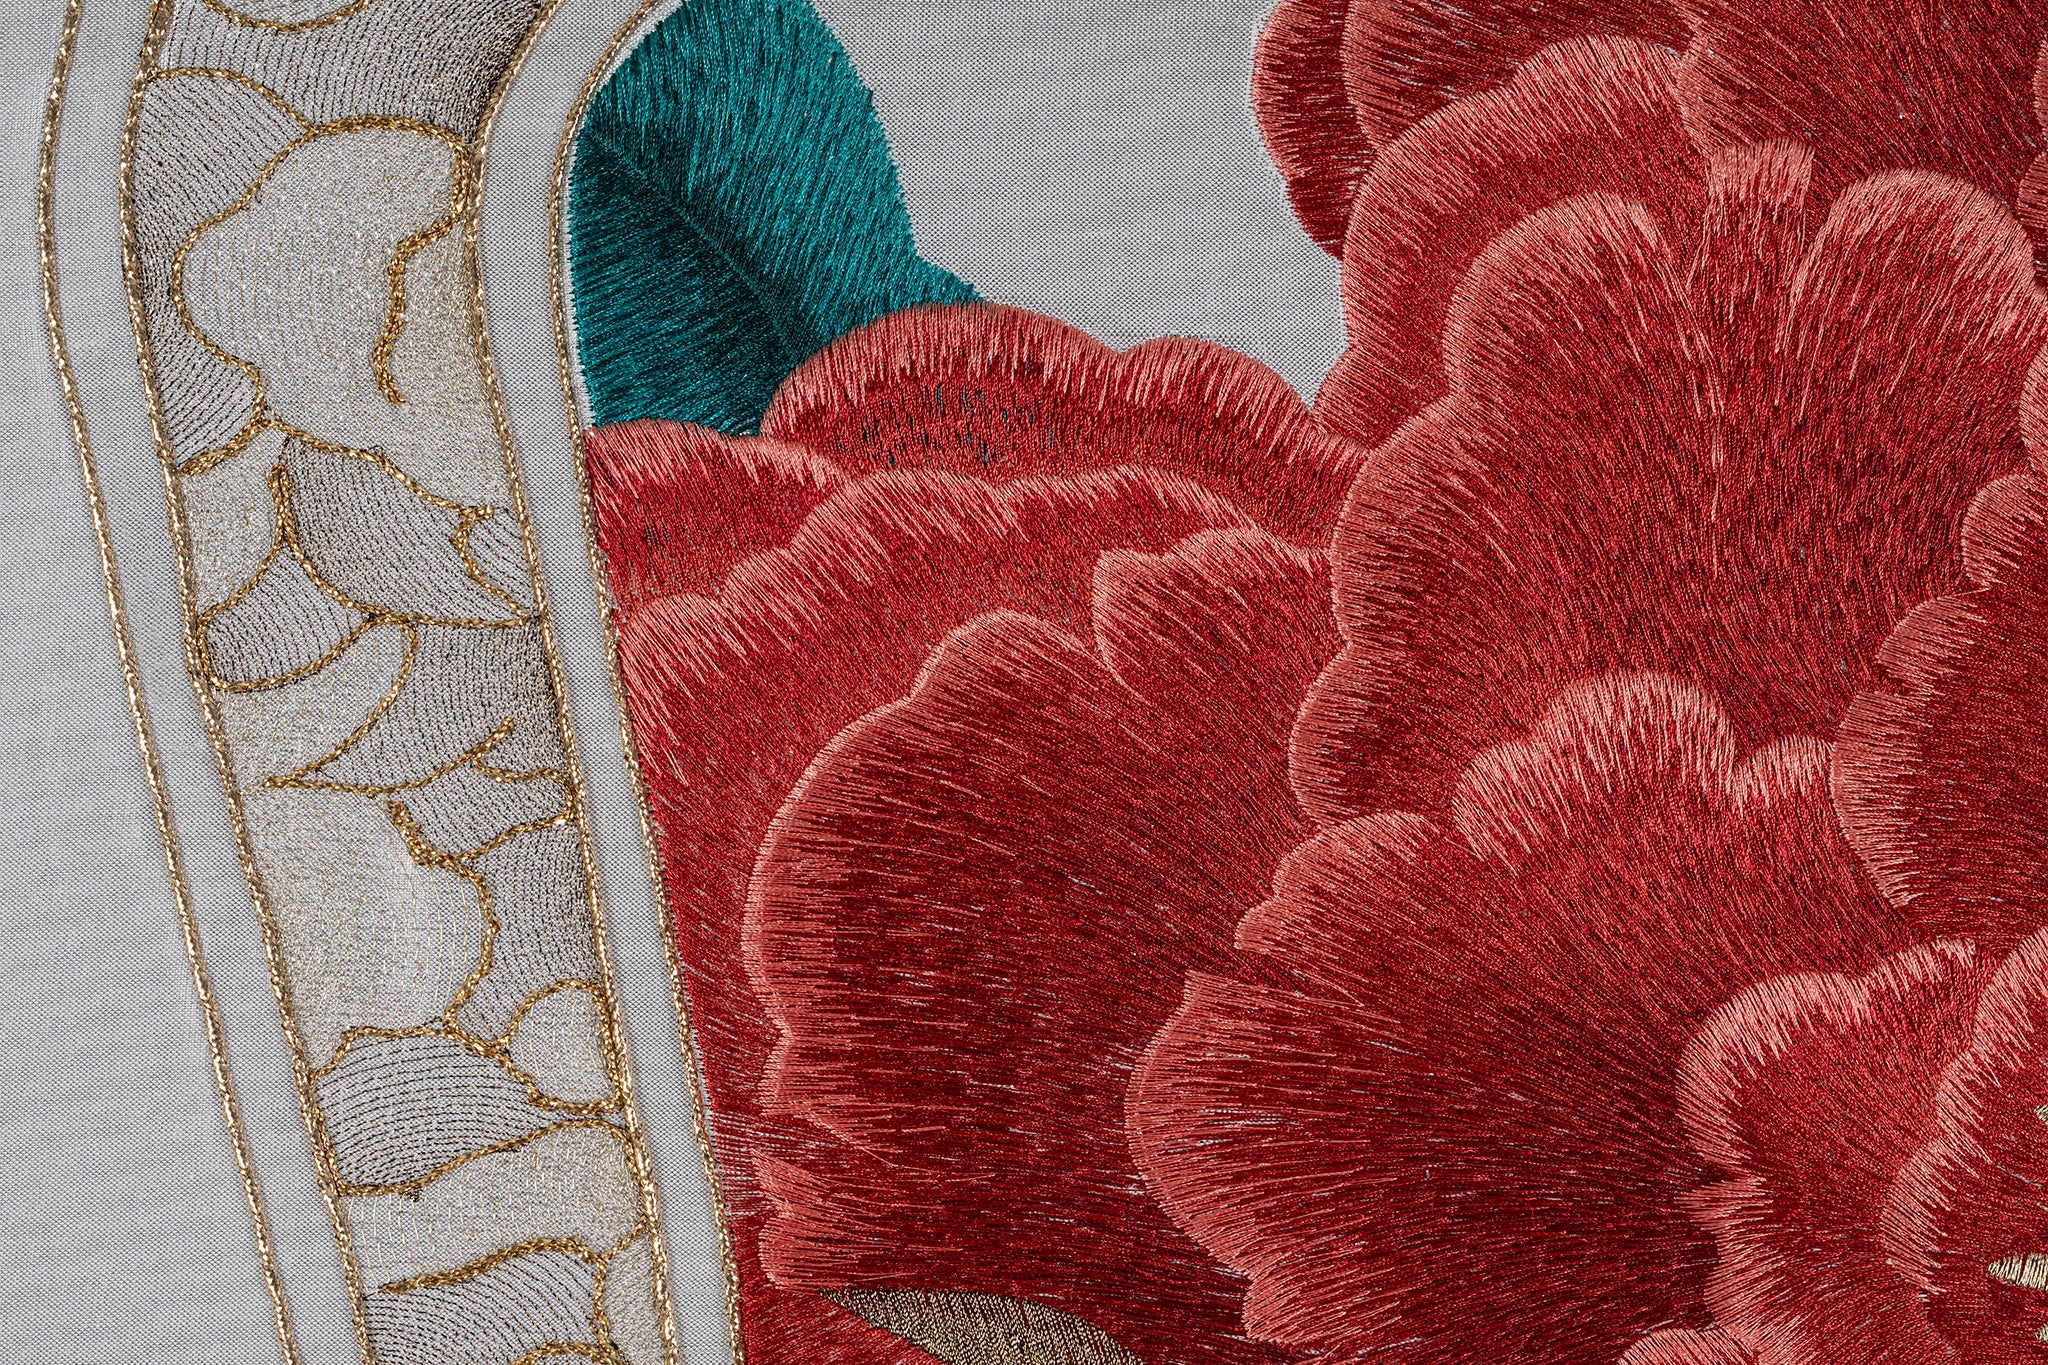 An embroidered work of art about a fan embroidered with peony flower patterns, with bright red thread and highlighted white silk embroidered thread embroidered with the nobility of the peony.